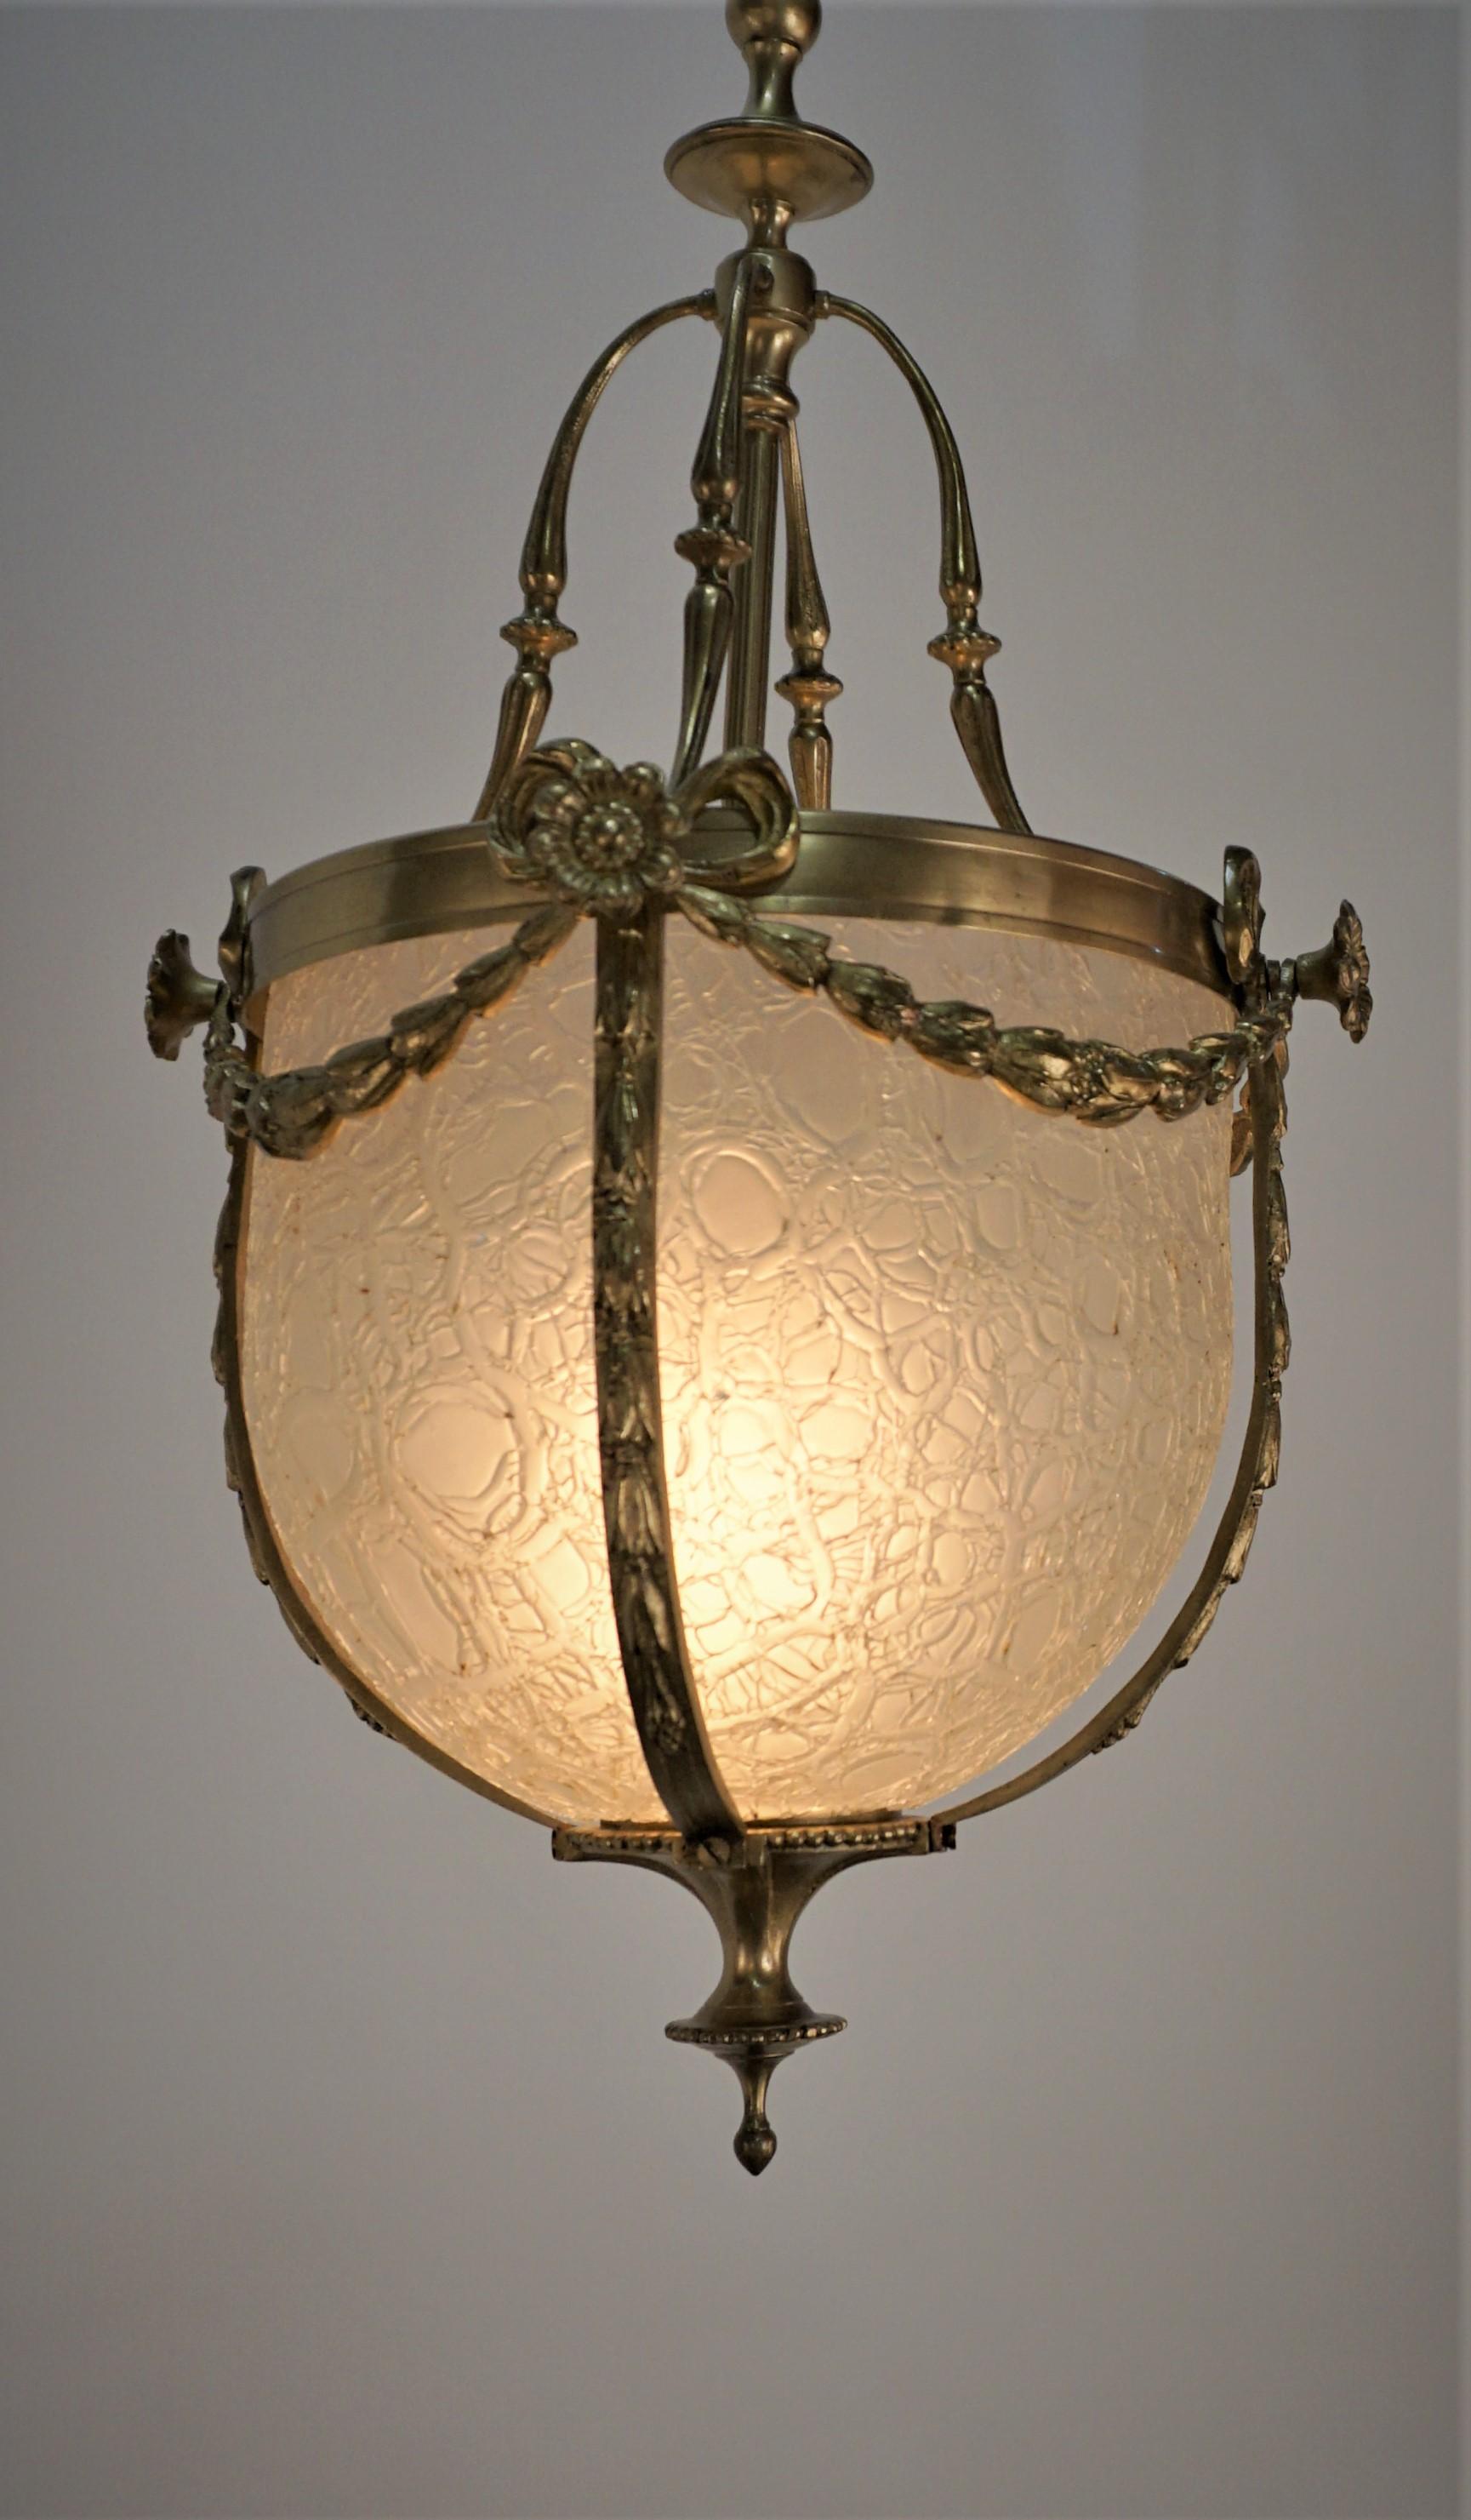 French 1920's bronze with texture crackle glass chandelier/lantern.
New wiring and ready for installation.